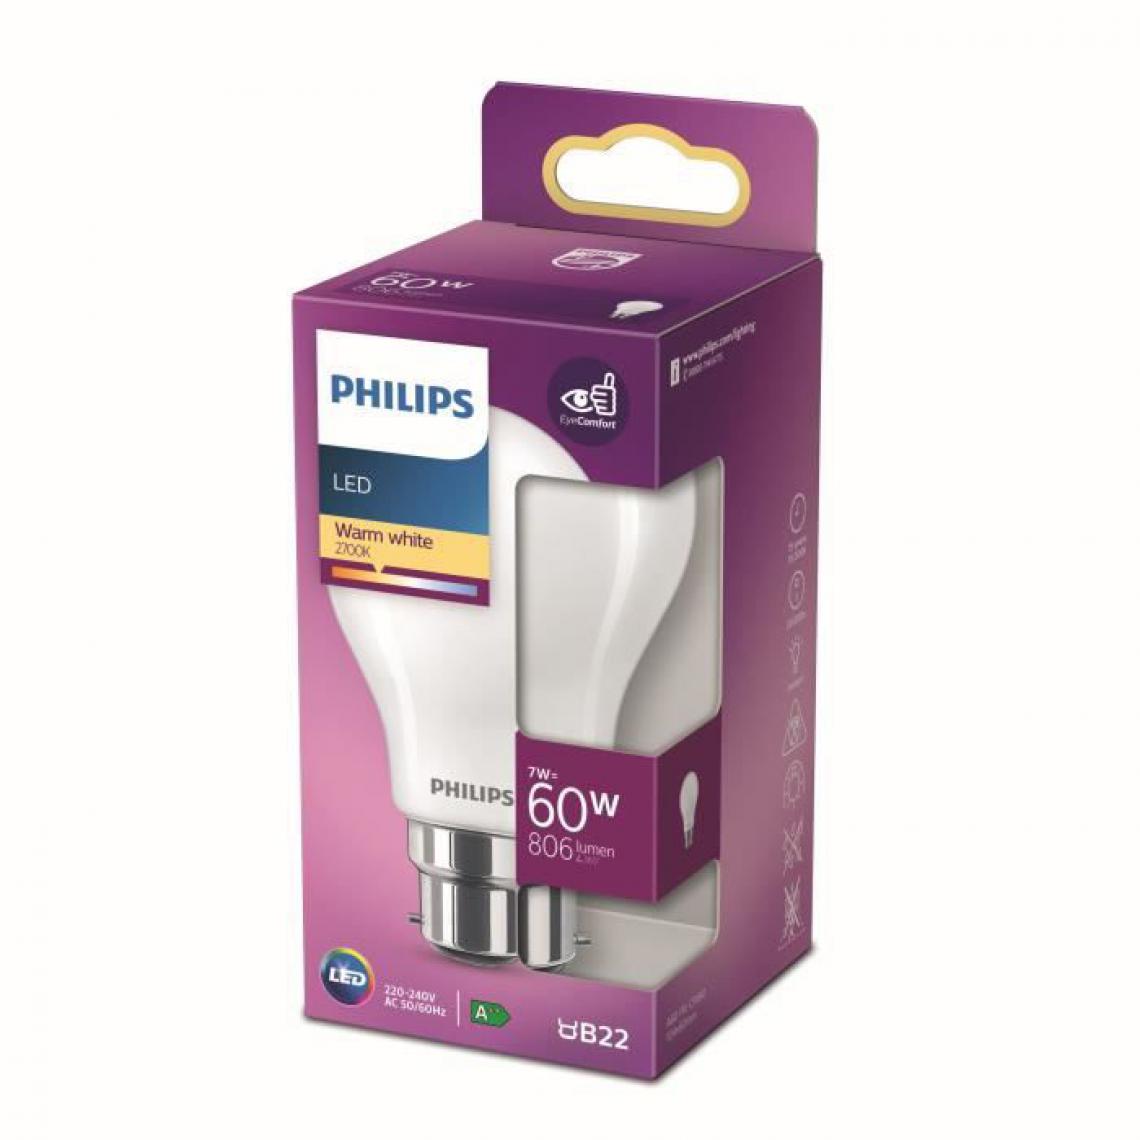 Philips - Philips ampoule LED Equivalent 60W B22 Blanc chaud non dimmable, verre - Ampoules LED